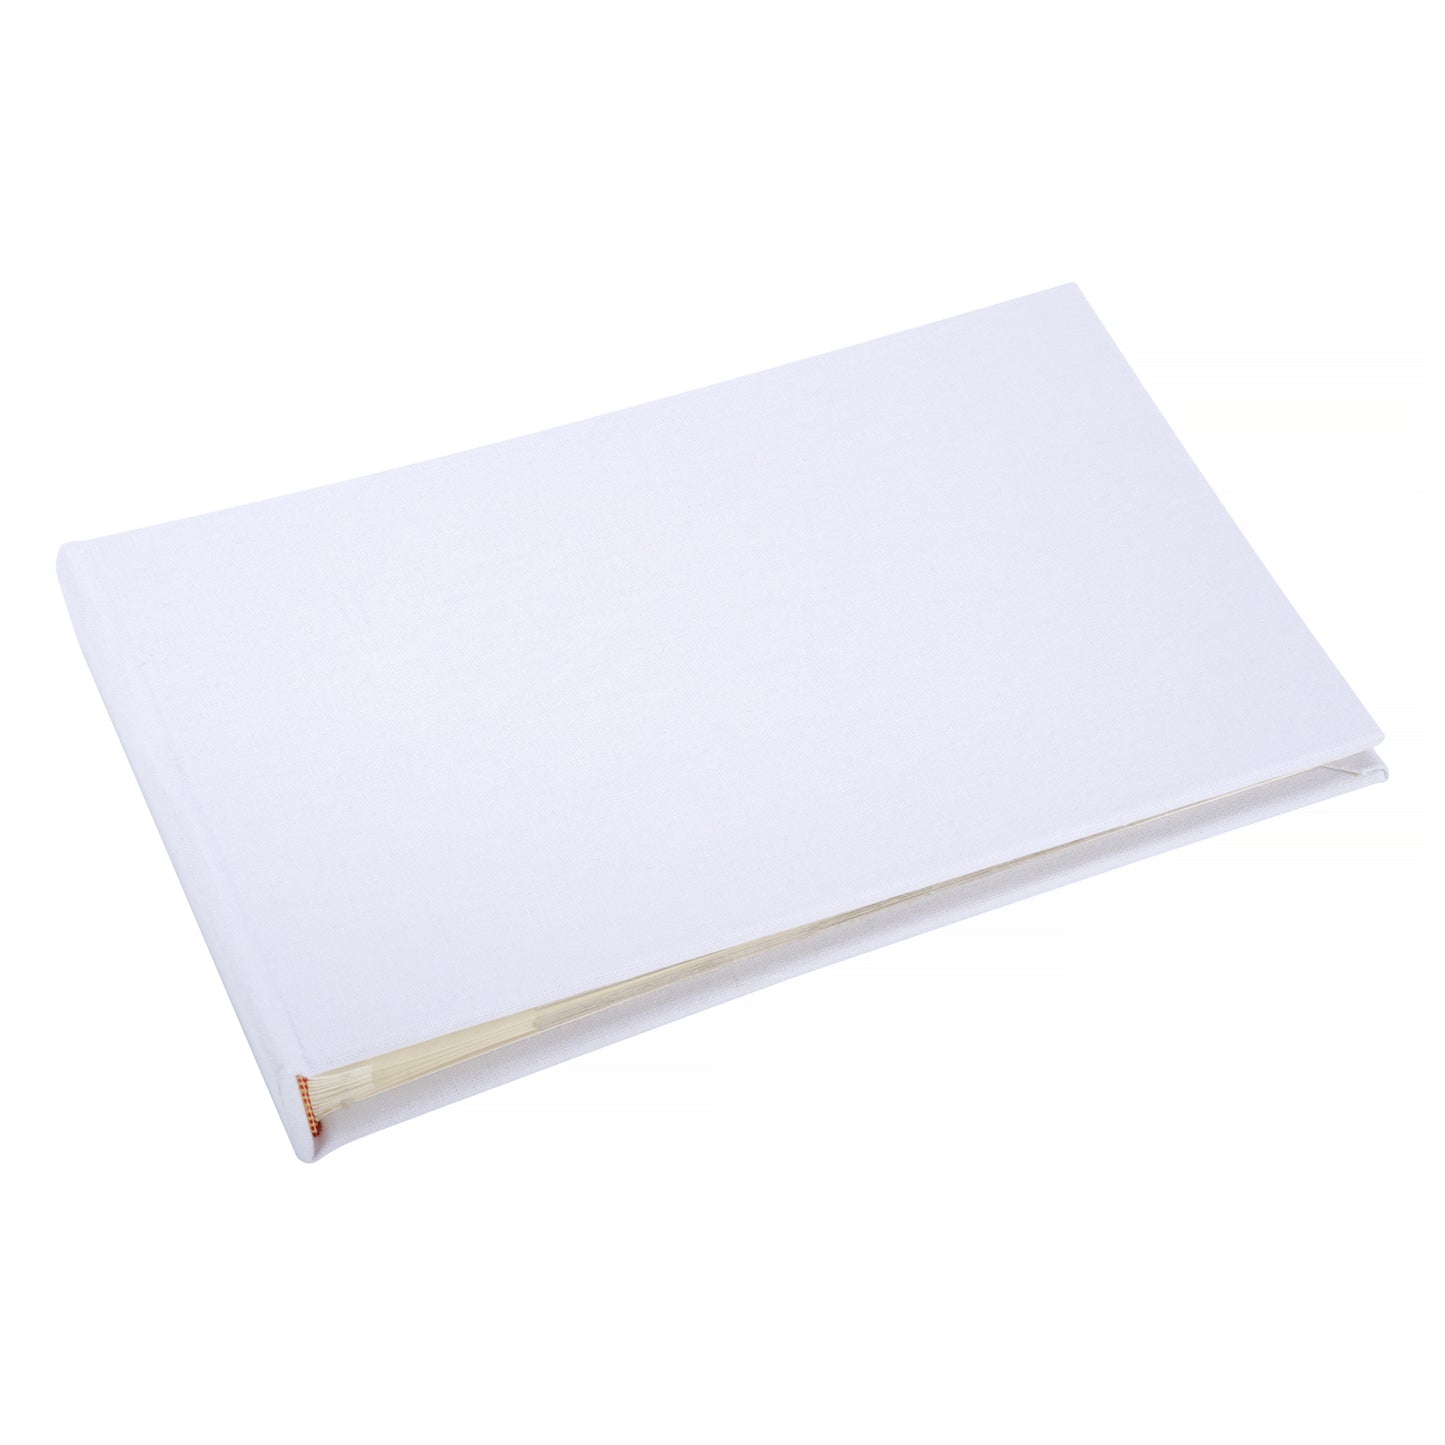 Blank photo albums to decorate yourself!